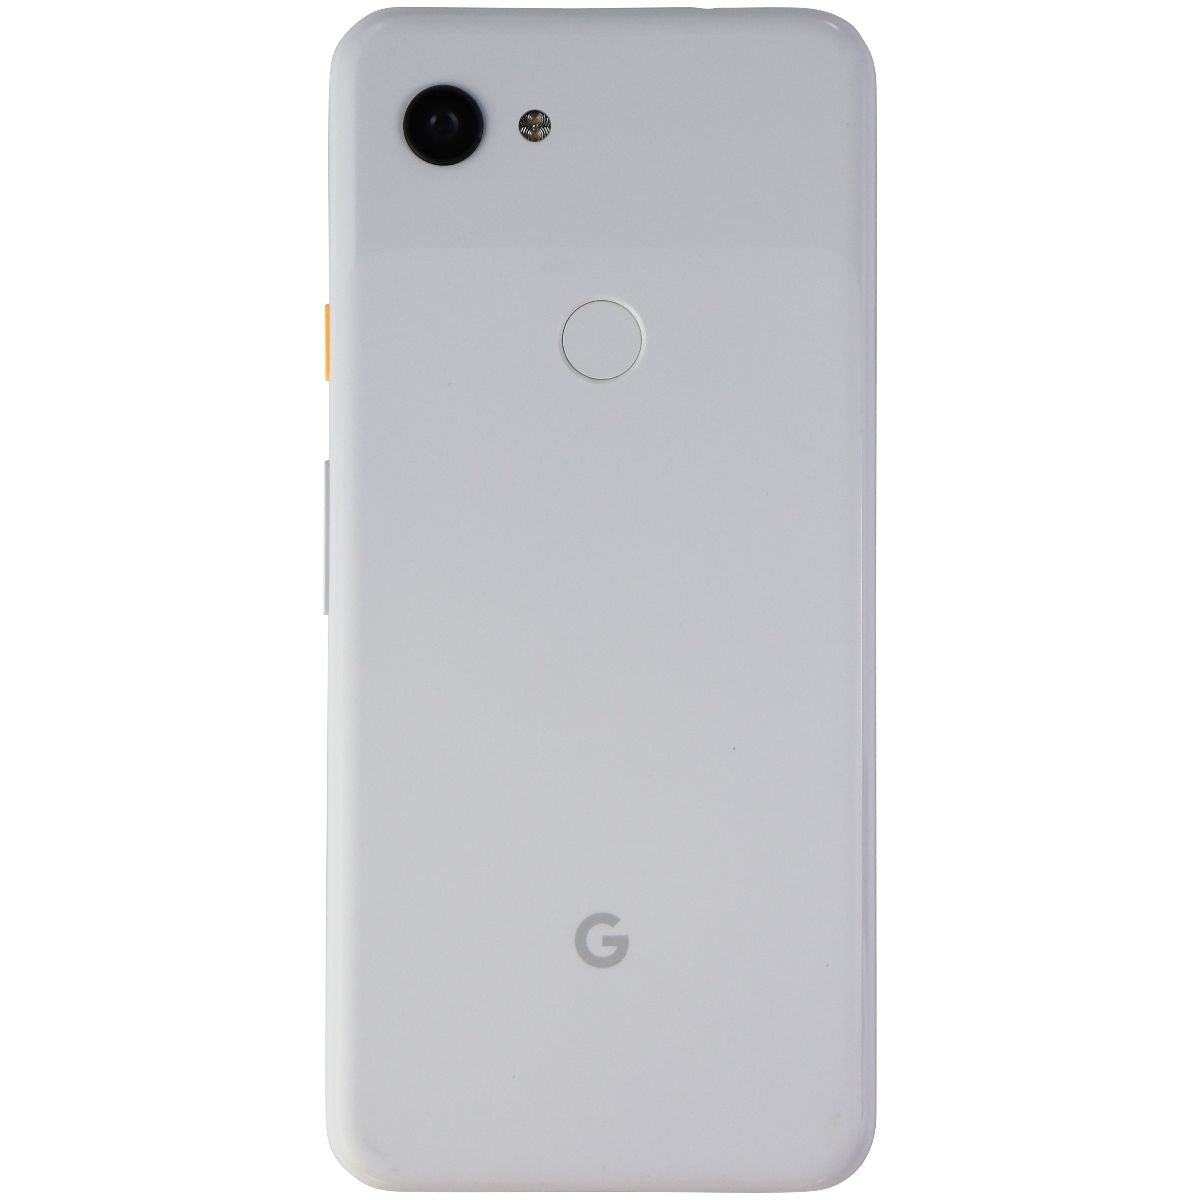 Google Pixel 3a (5.6-inch) Smartphone (G020G) Verizon Only - 64GB/Clearly White Cell Phones & Smartphones Google    - Simple Cell Bulk Wholesale Pricing - USA Seller